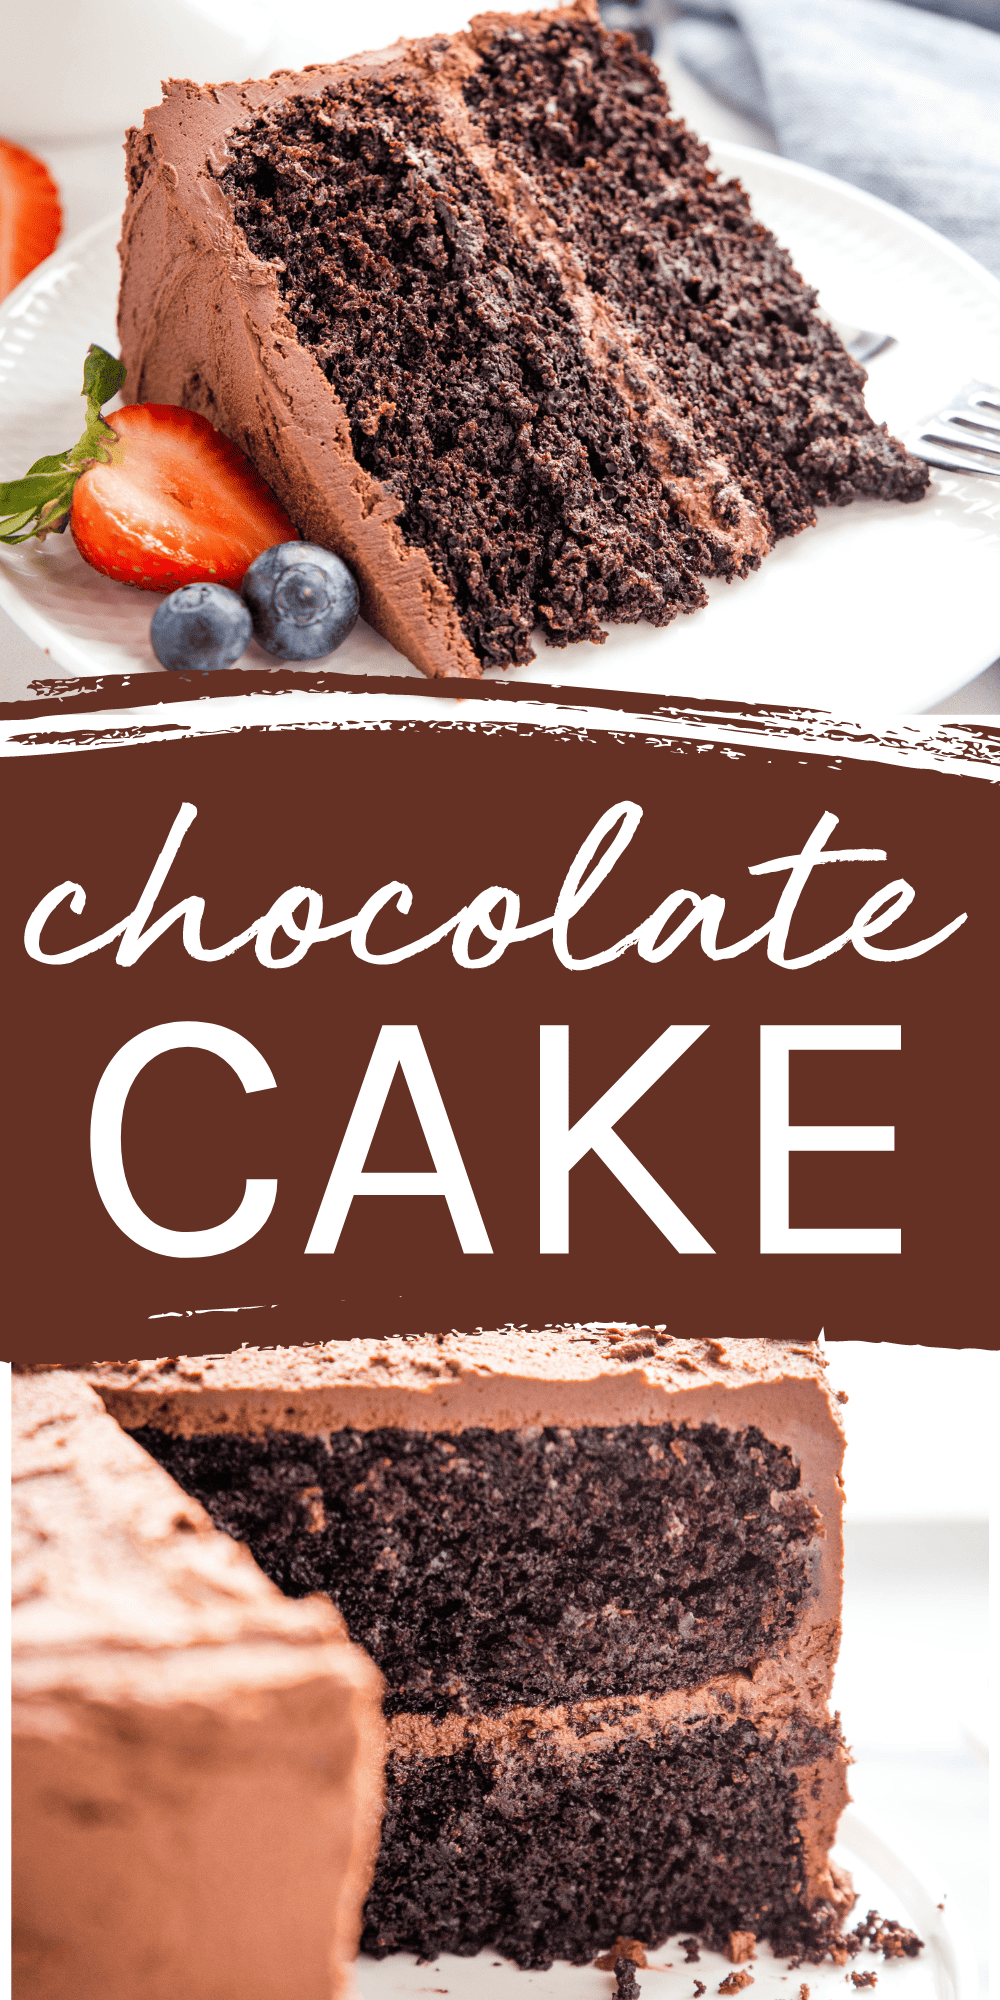 This Chocolate Layer Cake recipe is a classic dessert that's perfect for any occasion. Ultra moist chocolate cake thanks to a secret ingredient, frosted with the easiest fluffy chocolate buttercream. The perfect chocolate cake recipe for beginners! Recipe from thebusybaker.ca! #chocolatecake #easychocolatecake #besteverchocolatecake #chocolatecakerecipe #easycake #cakeforbeginners #bakingtutorial #howtomakechocolatecake via @busybakerblog